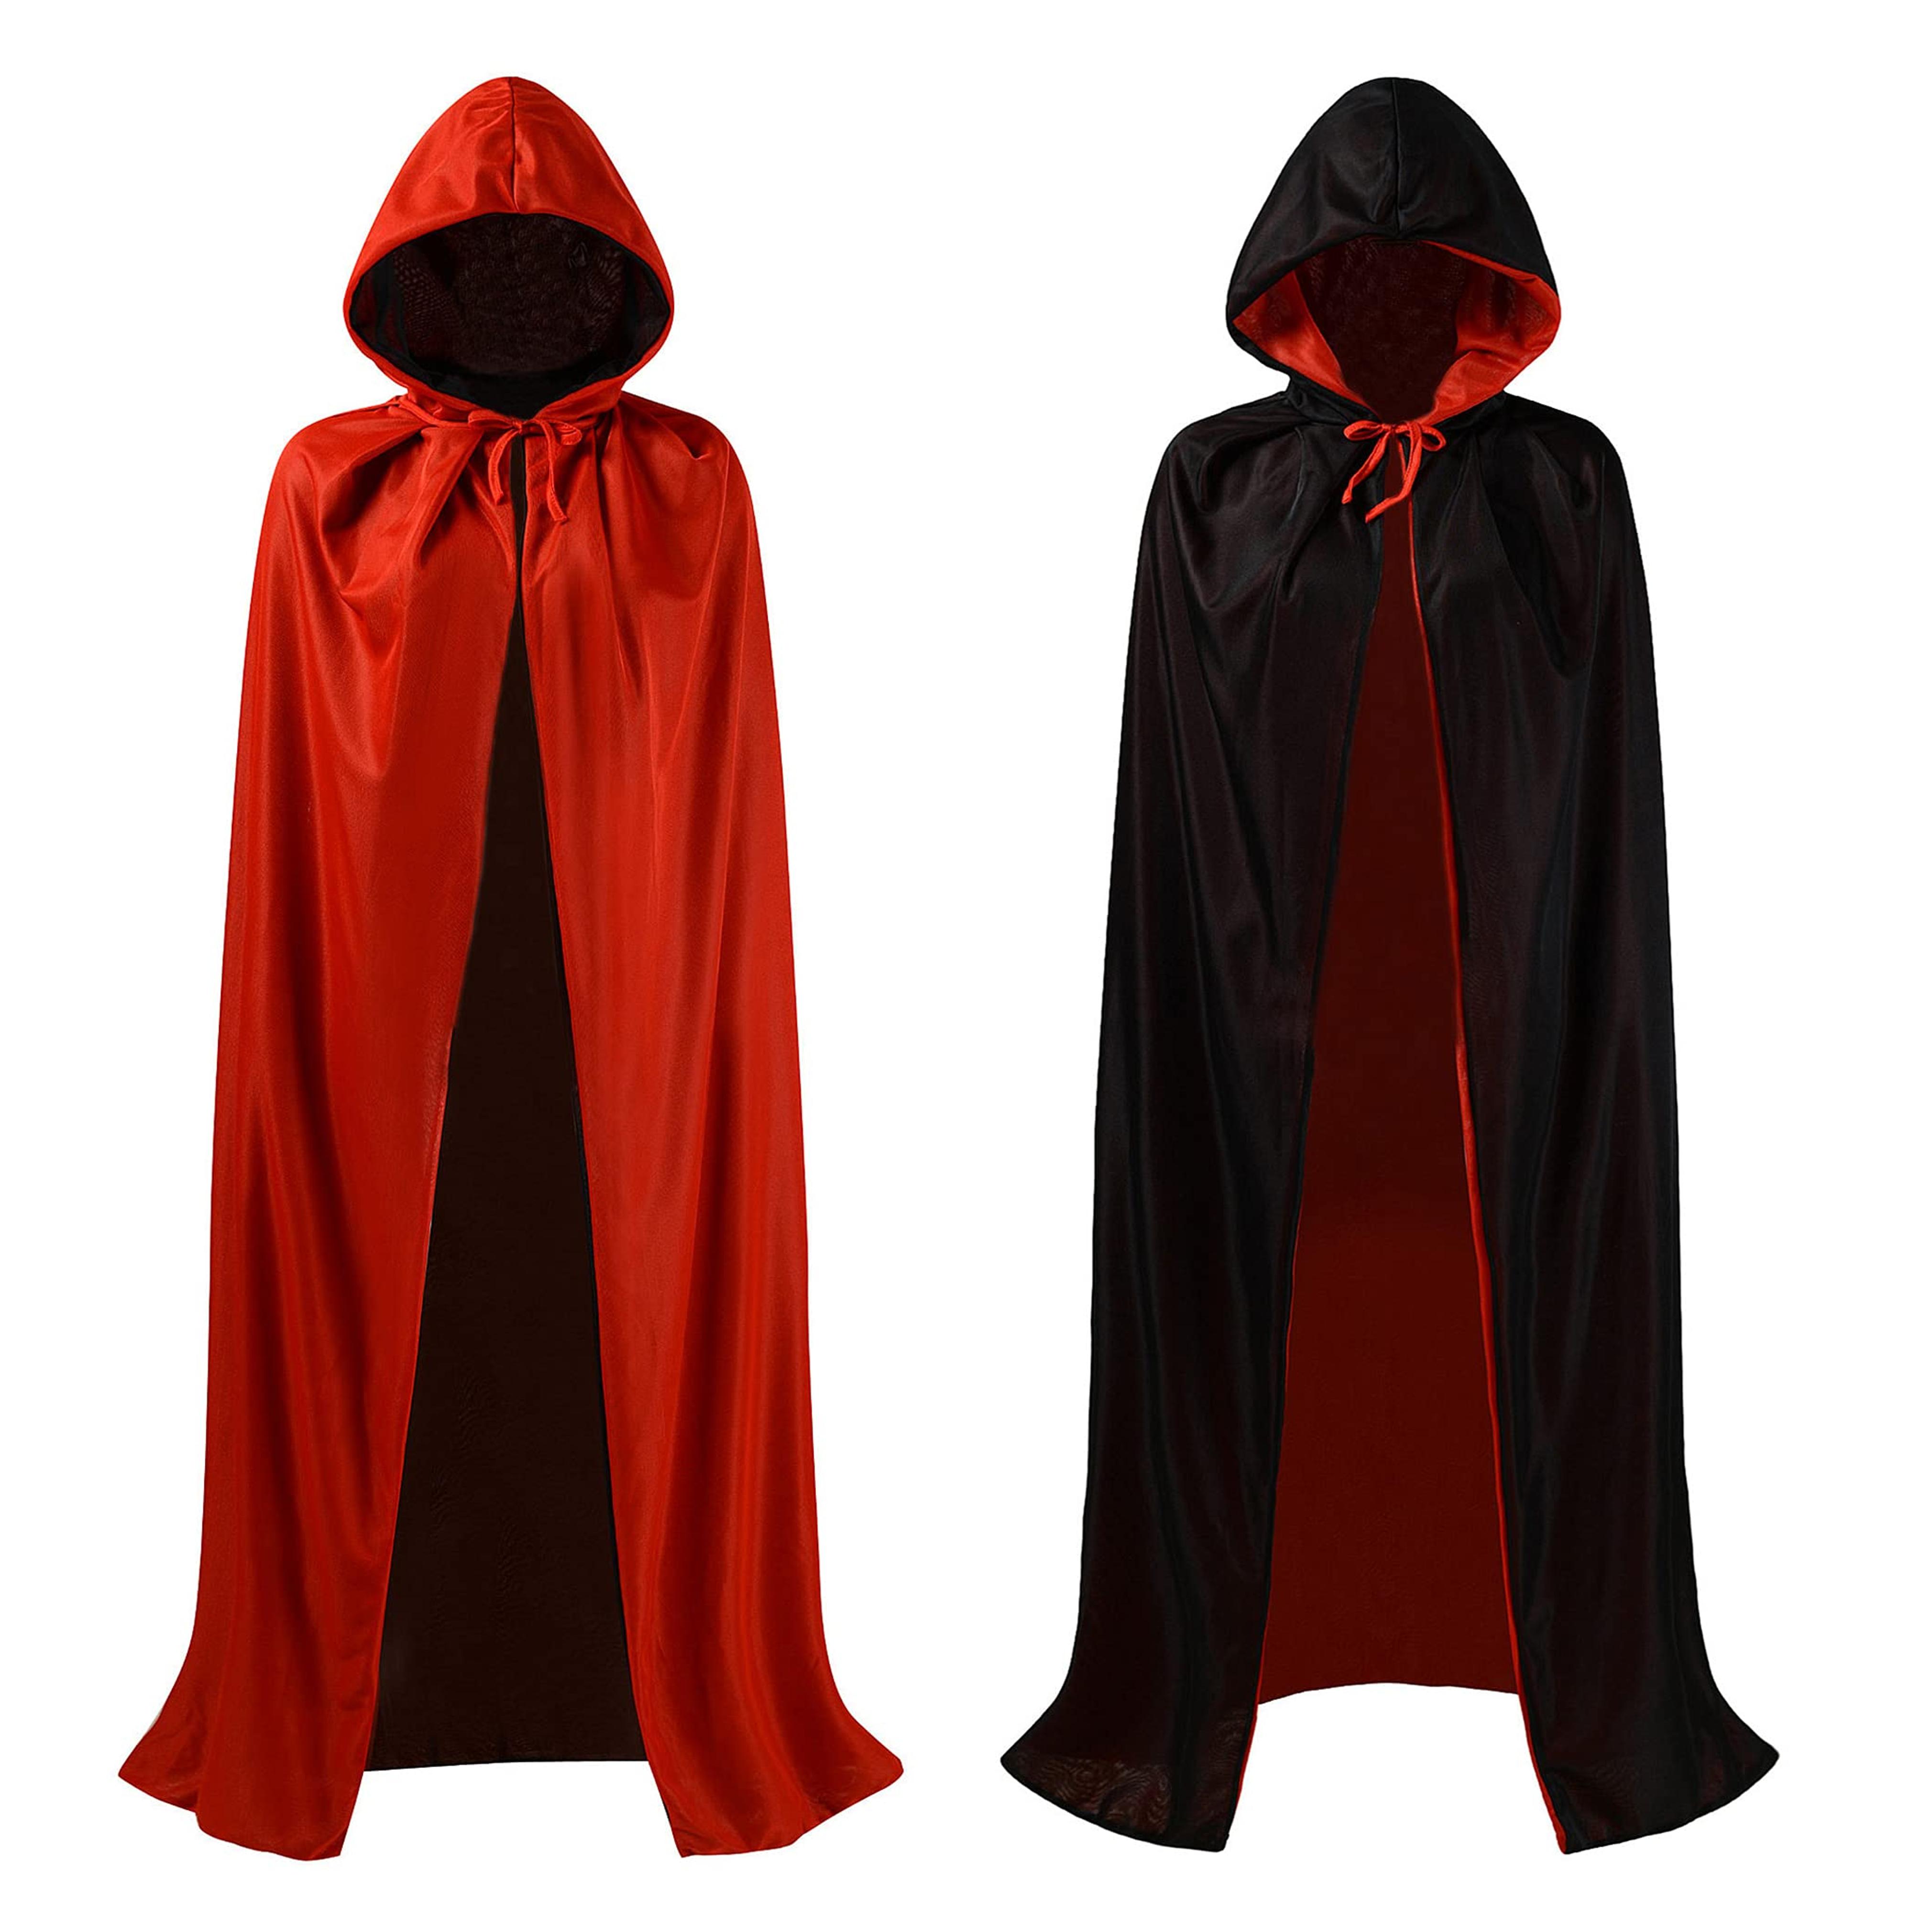 Black and Red Reversible Halloween Christmas Cloak Masquerade Party Cape Costume (47 inch, With Hood)